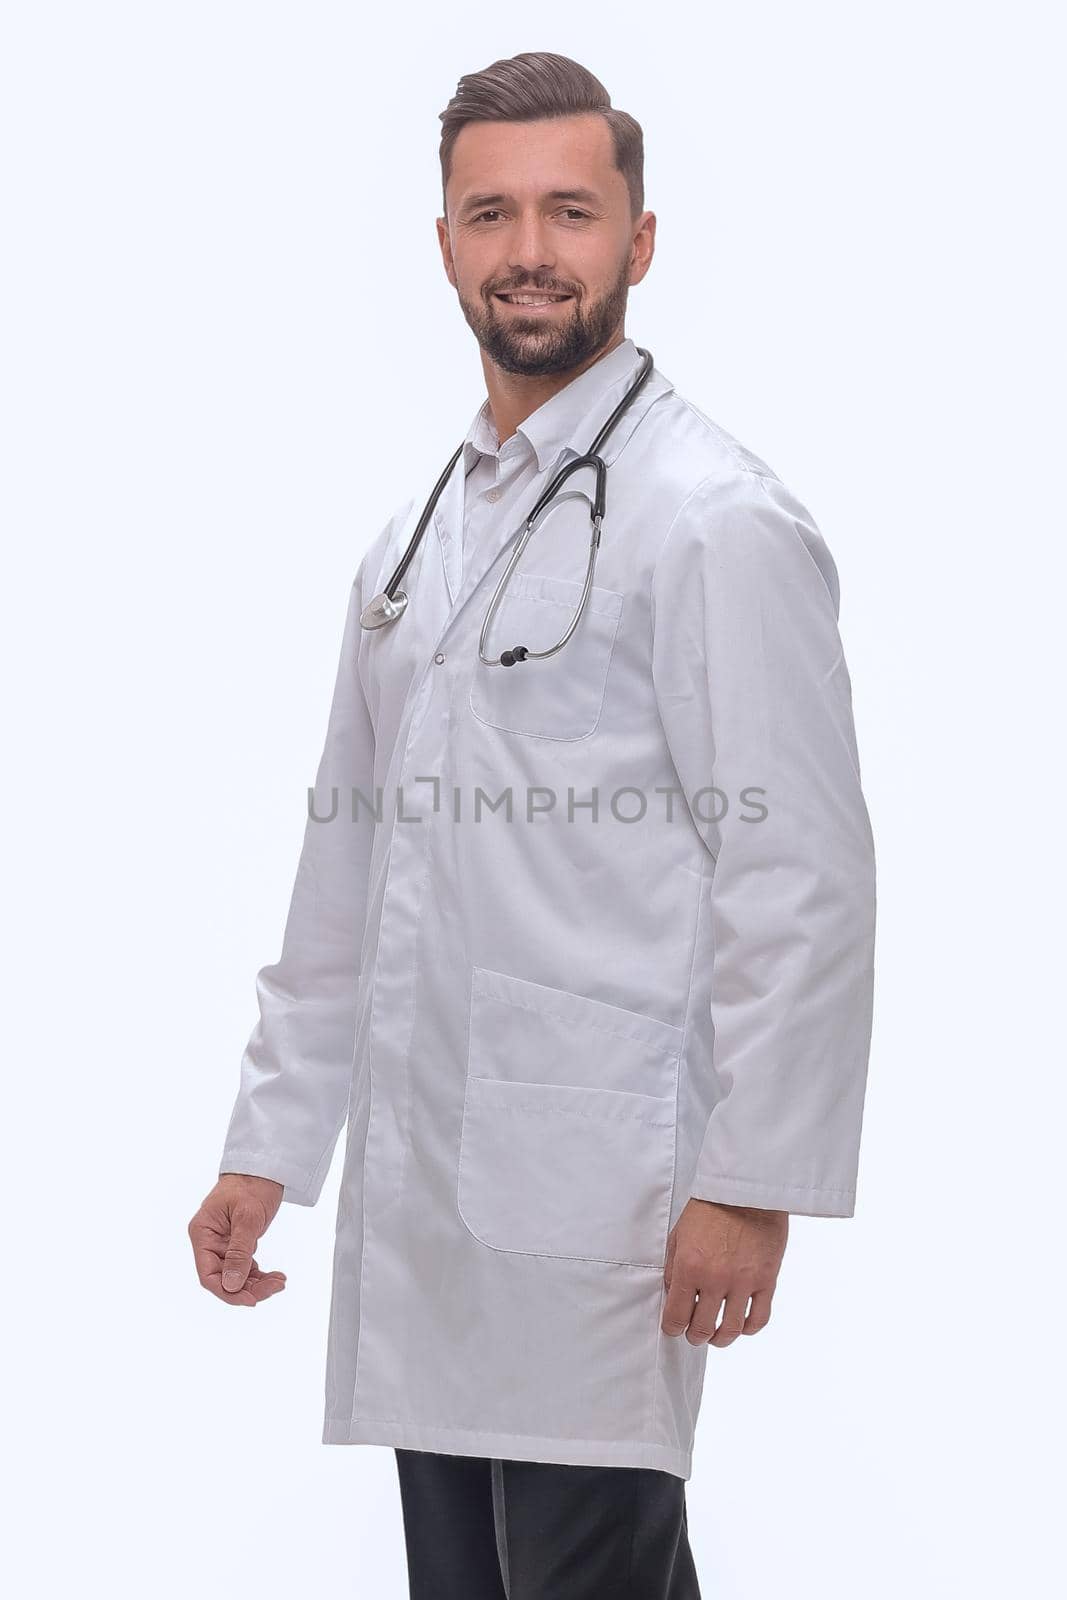 in full growth. medical professional with stethoscope .isolated on white background